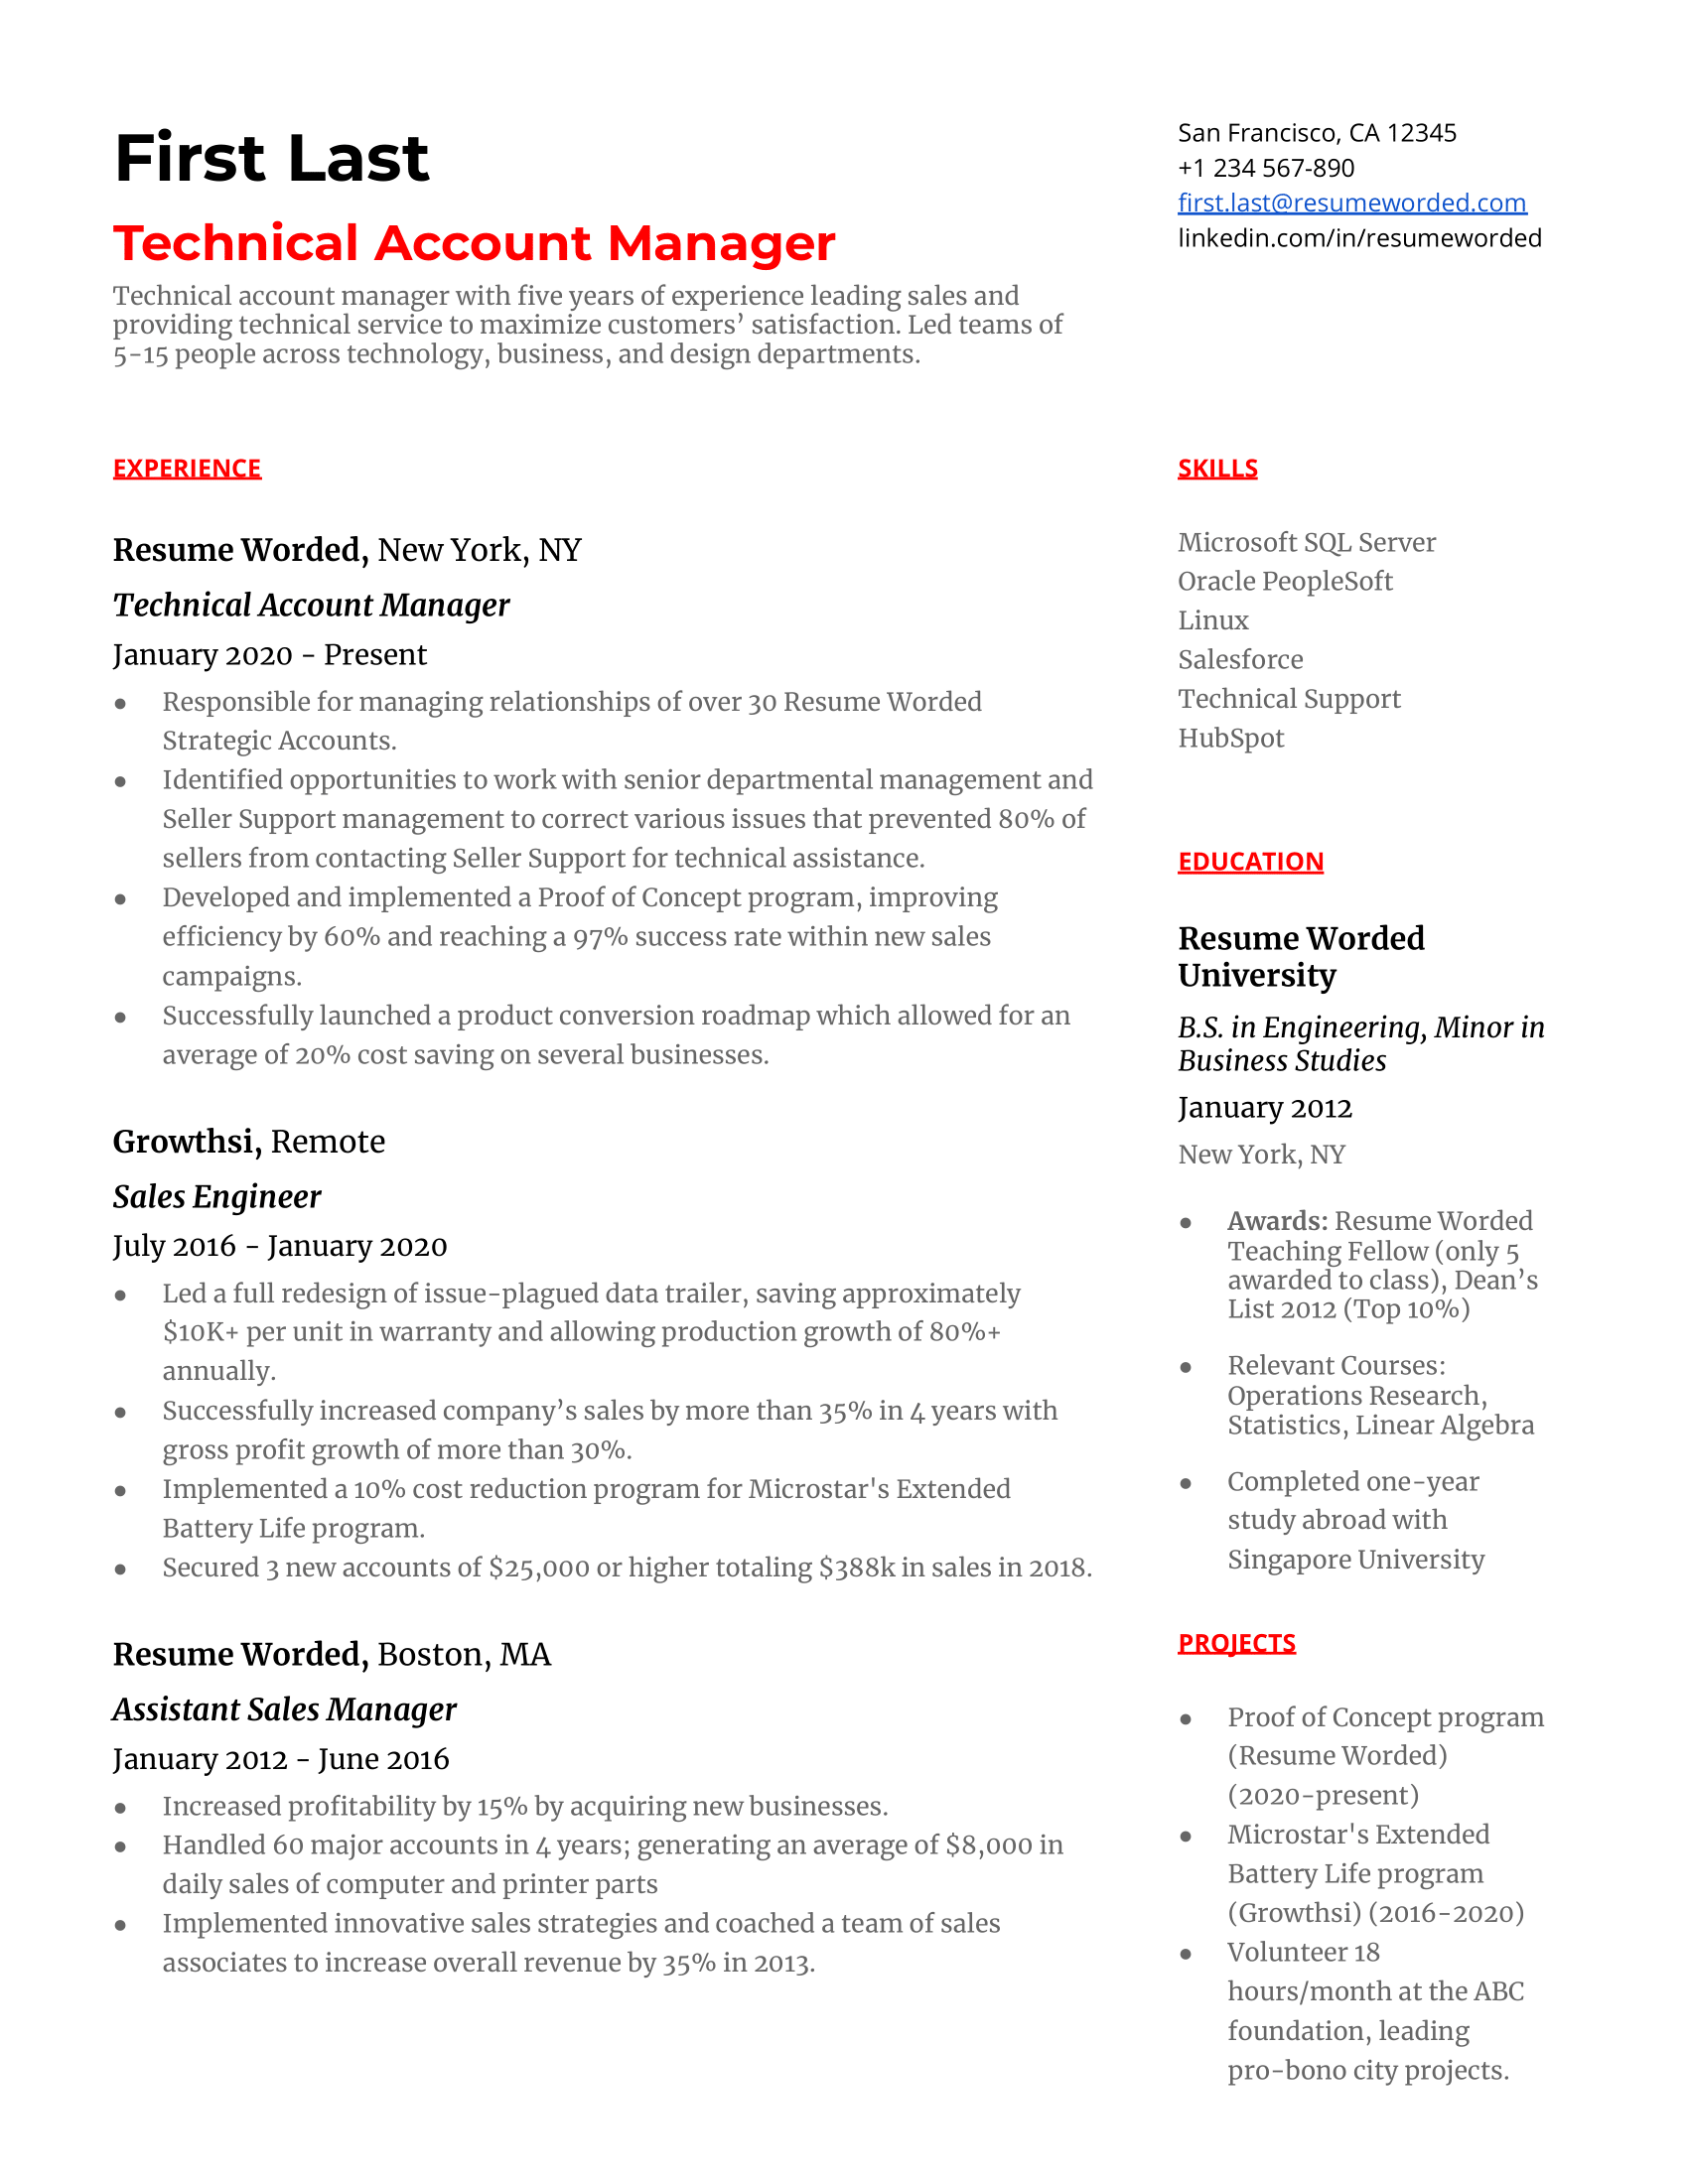 Technical Account Manager Resume Sample